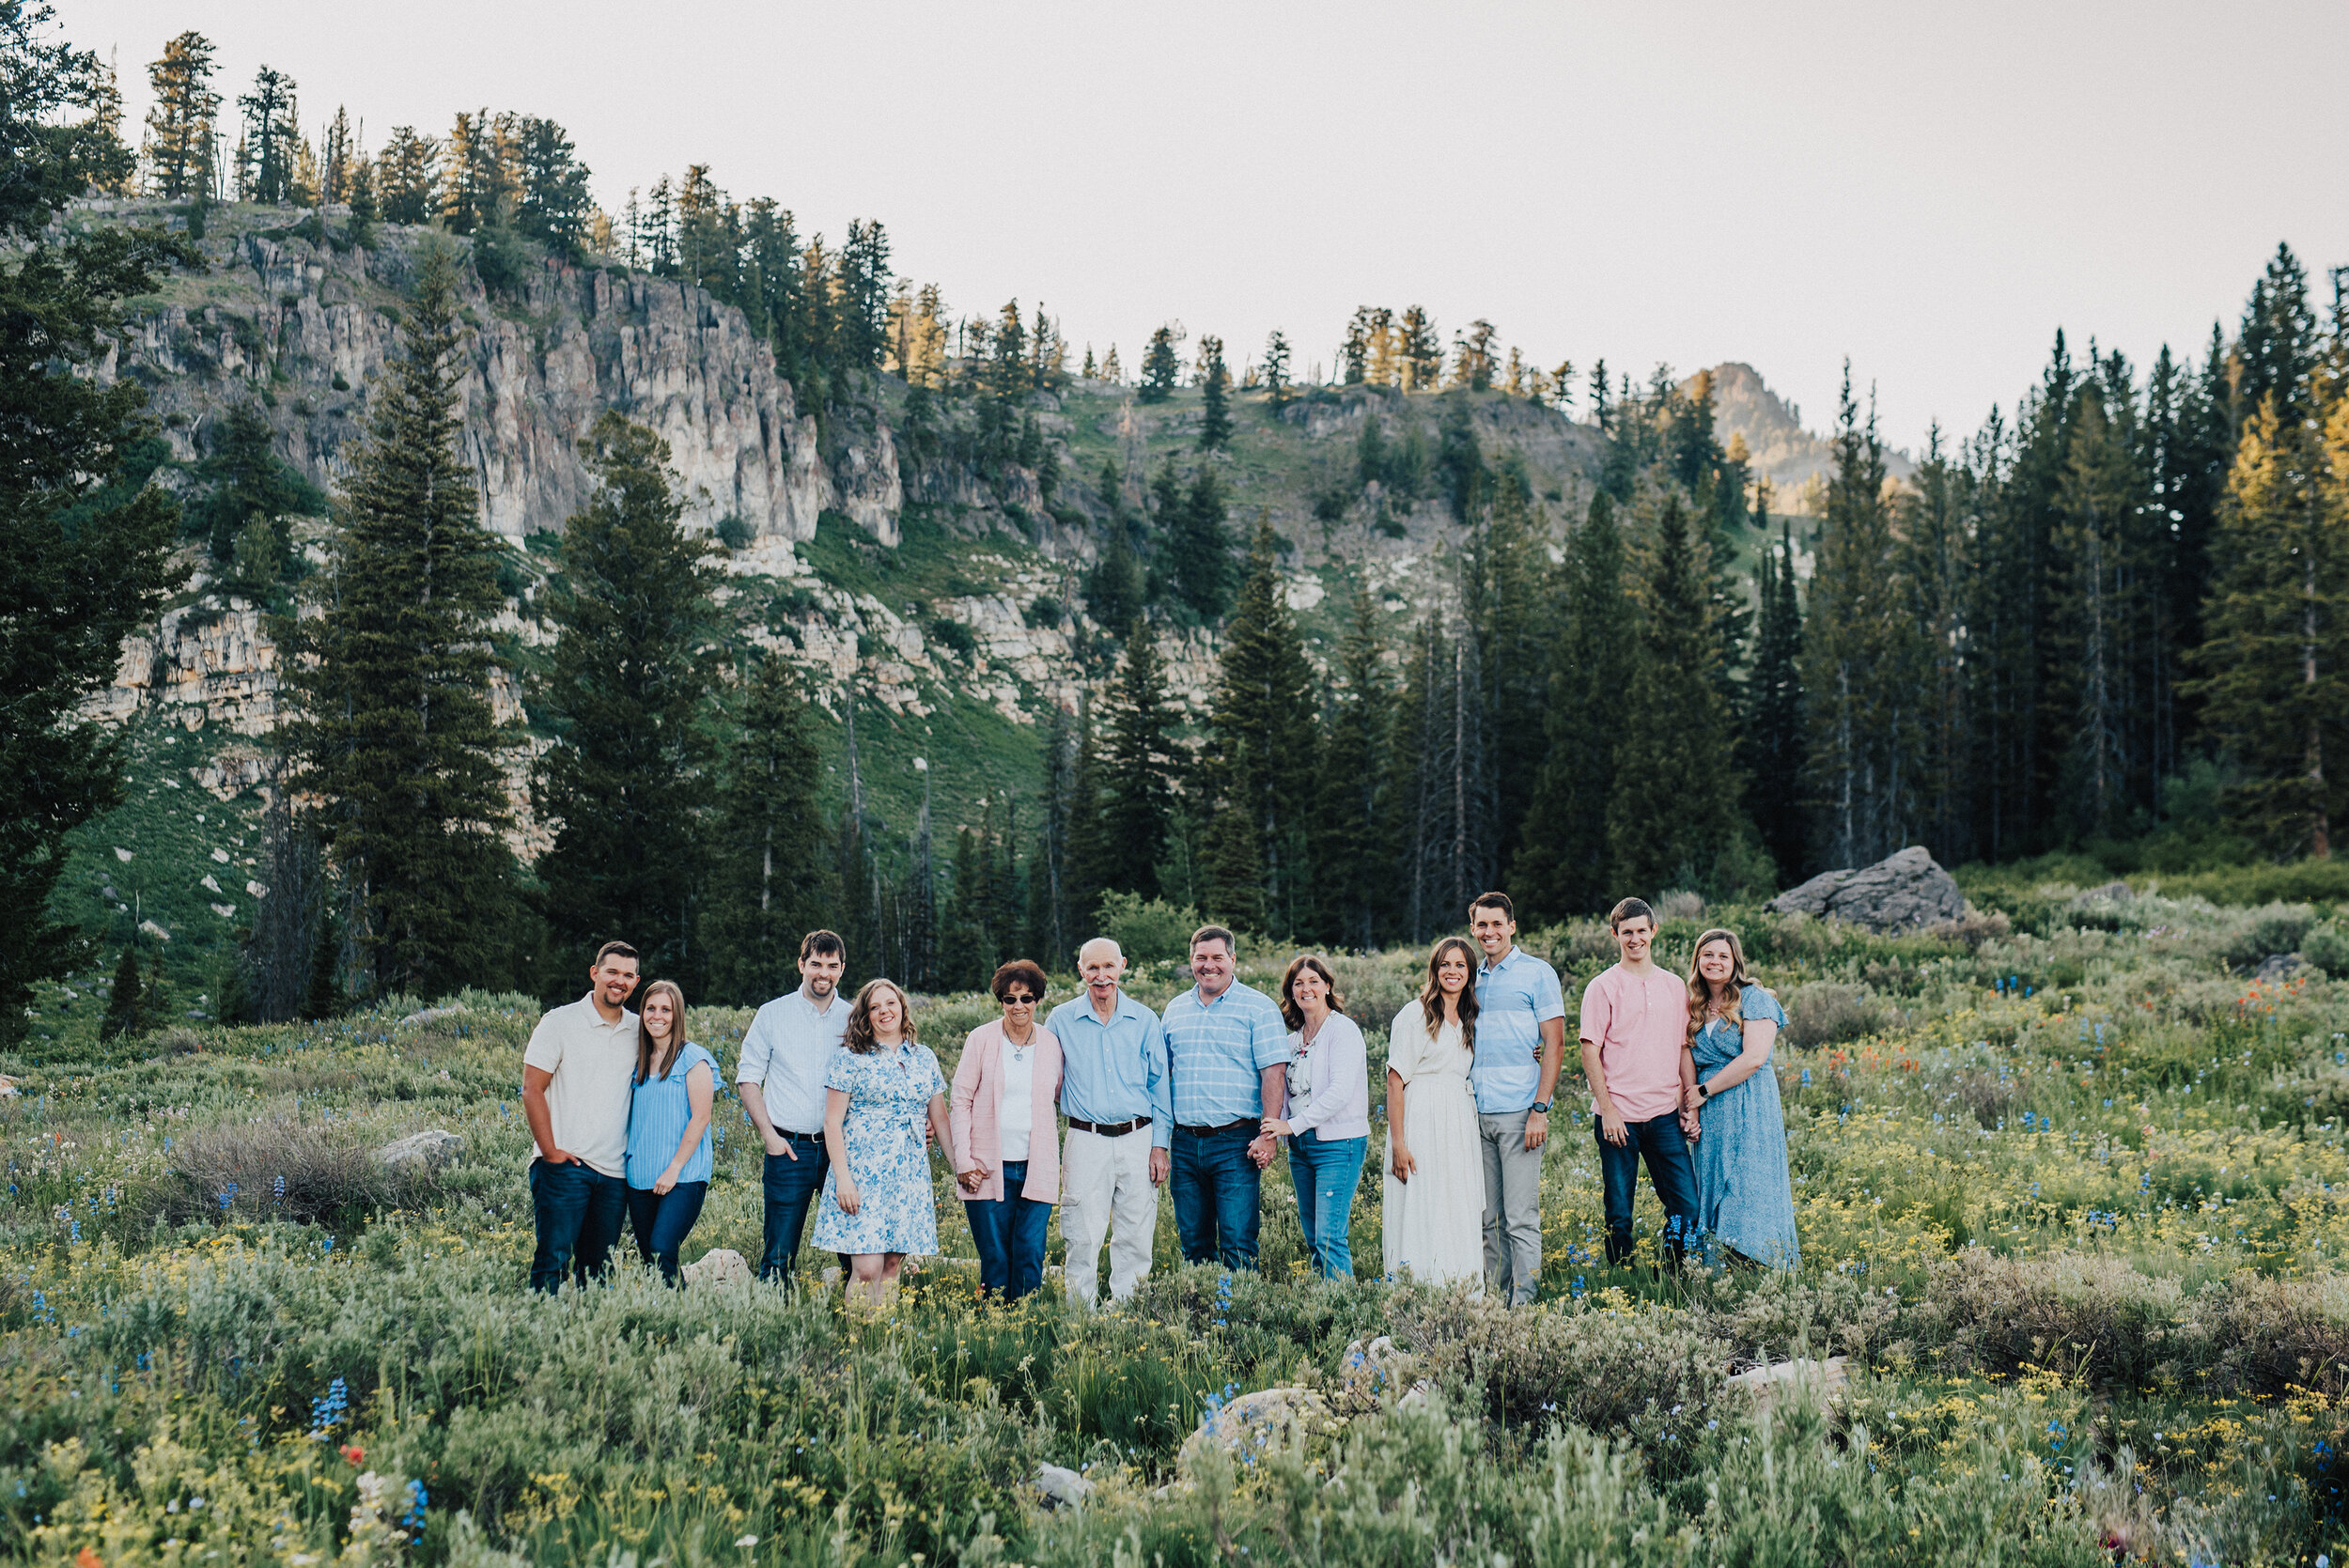 Striking family photo shoot in a gorgeous meadow up Logan canyon at Tony Grove. Logan Utah family photographer Kristi Alyse photography Tony Grove forest nature photos Logan canyon light blue family photos wild flowers grand parents children parents spouses reunited dreamy scenic photo shoot #kristialysephotography #utahphotographer #familyphotography #logancanyon #familyphotos #forest #wildflowers #northernutah #familyportraits #family